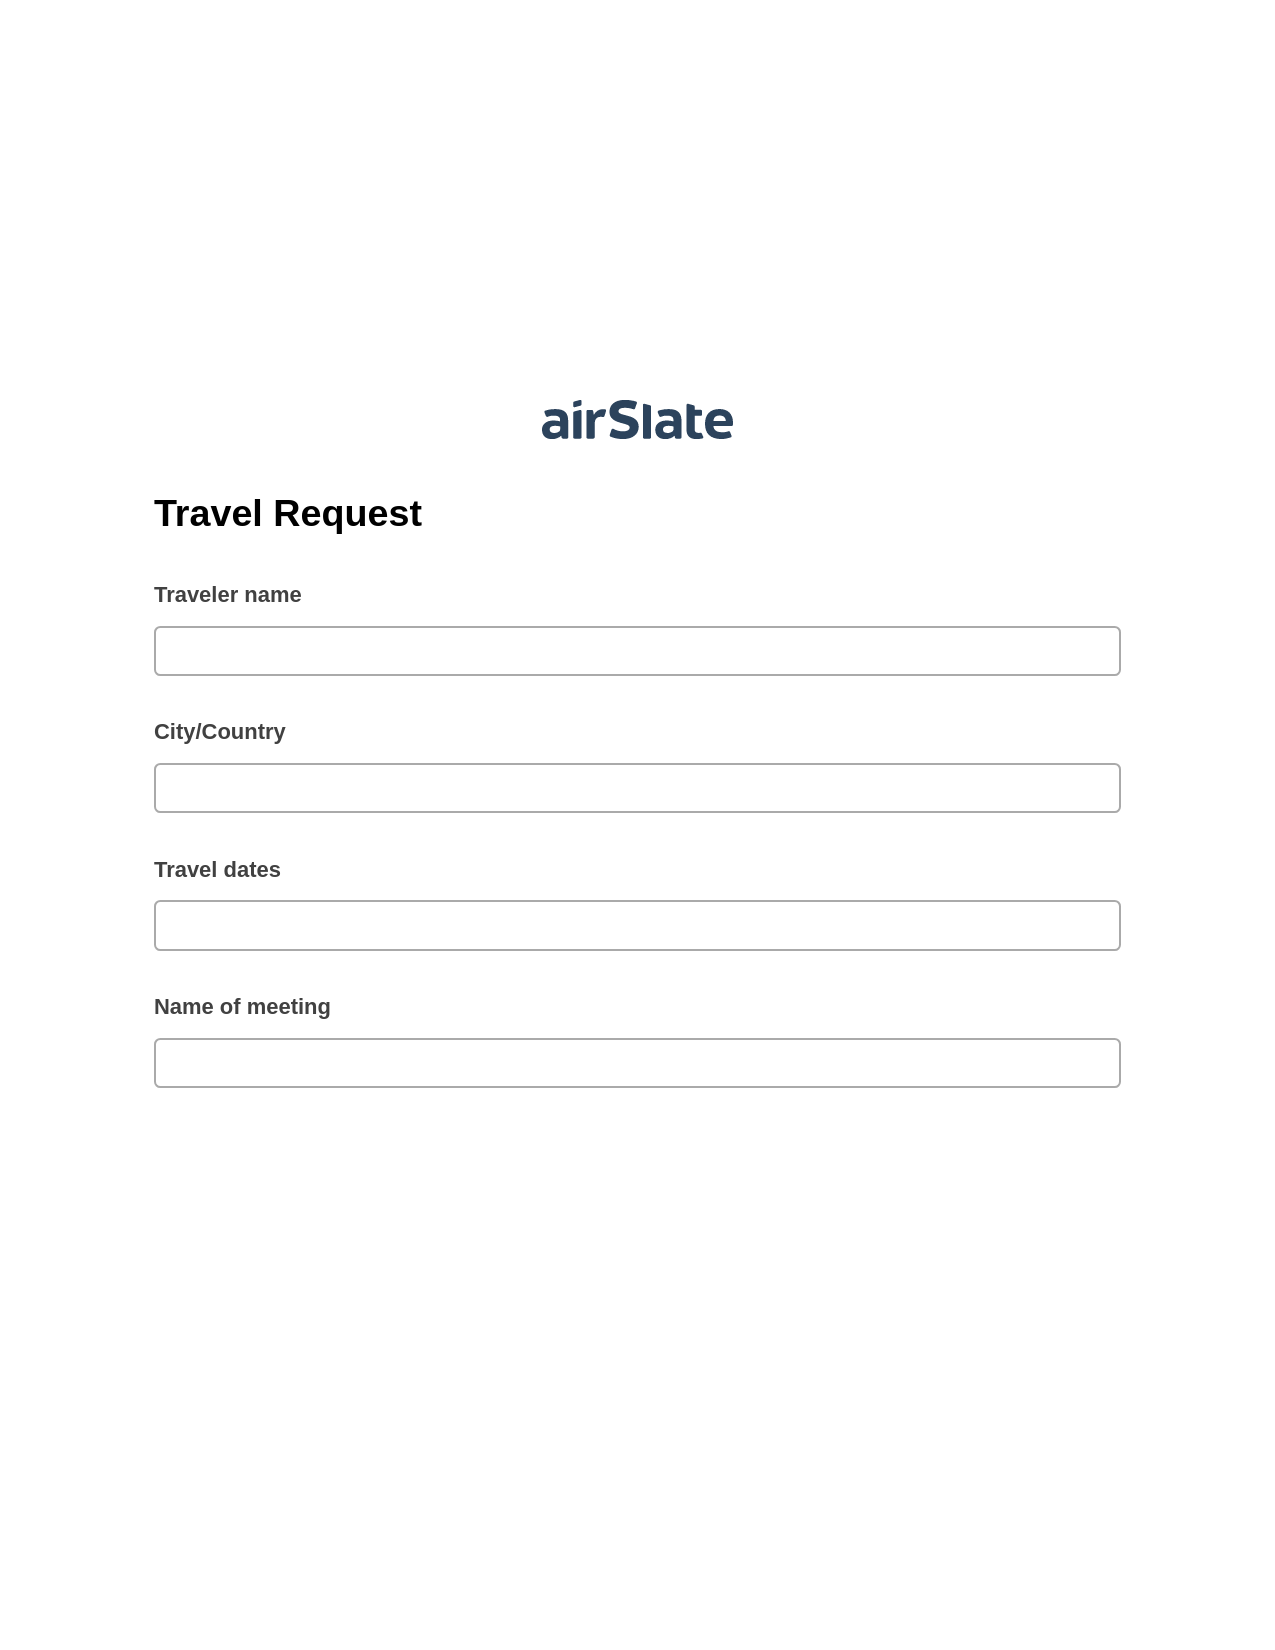 Multirole Travel Request Pre-fill from Salesforce Record Bot, Create slate addon, Post-finish Document Bot